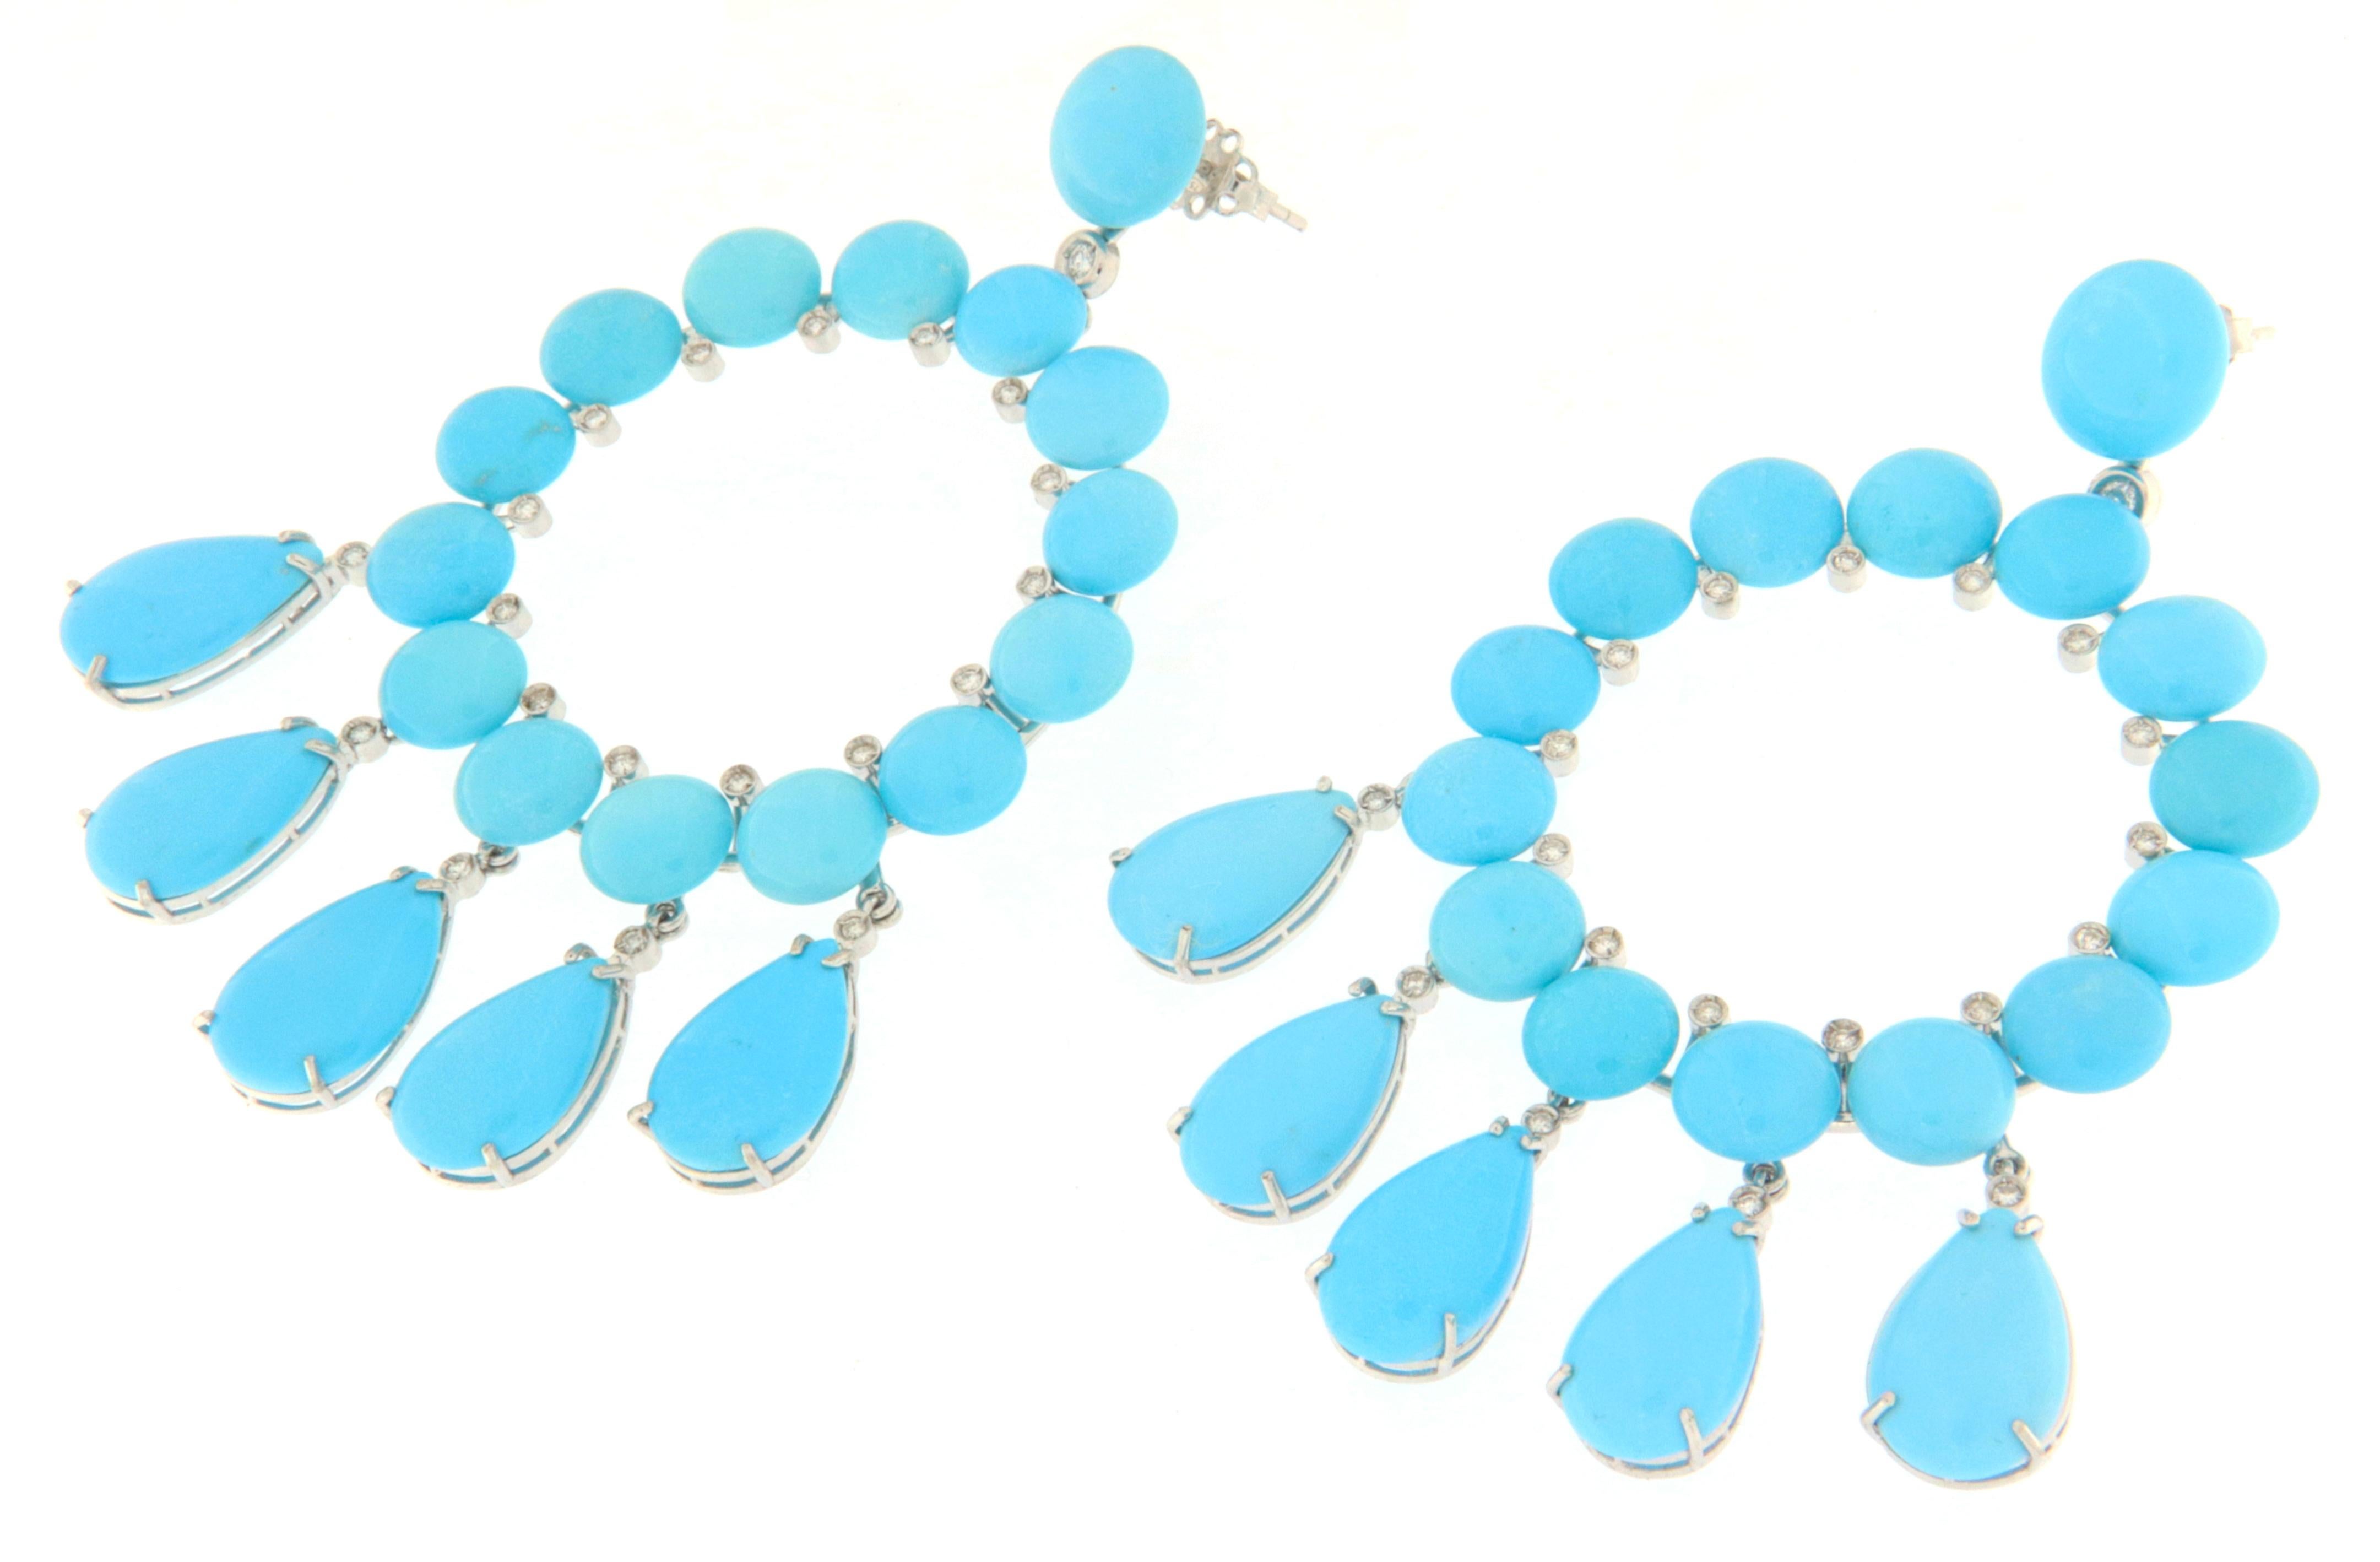 Contemporary Diamonds Turquoise White Gold 18 Karat Drop Earrings For Sale